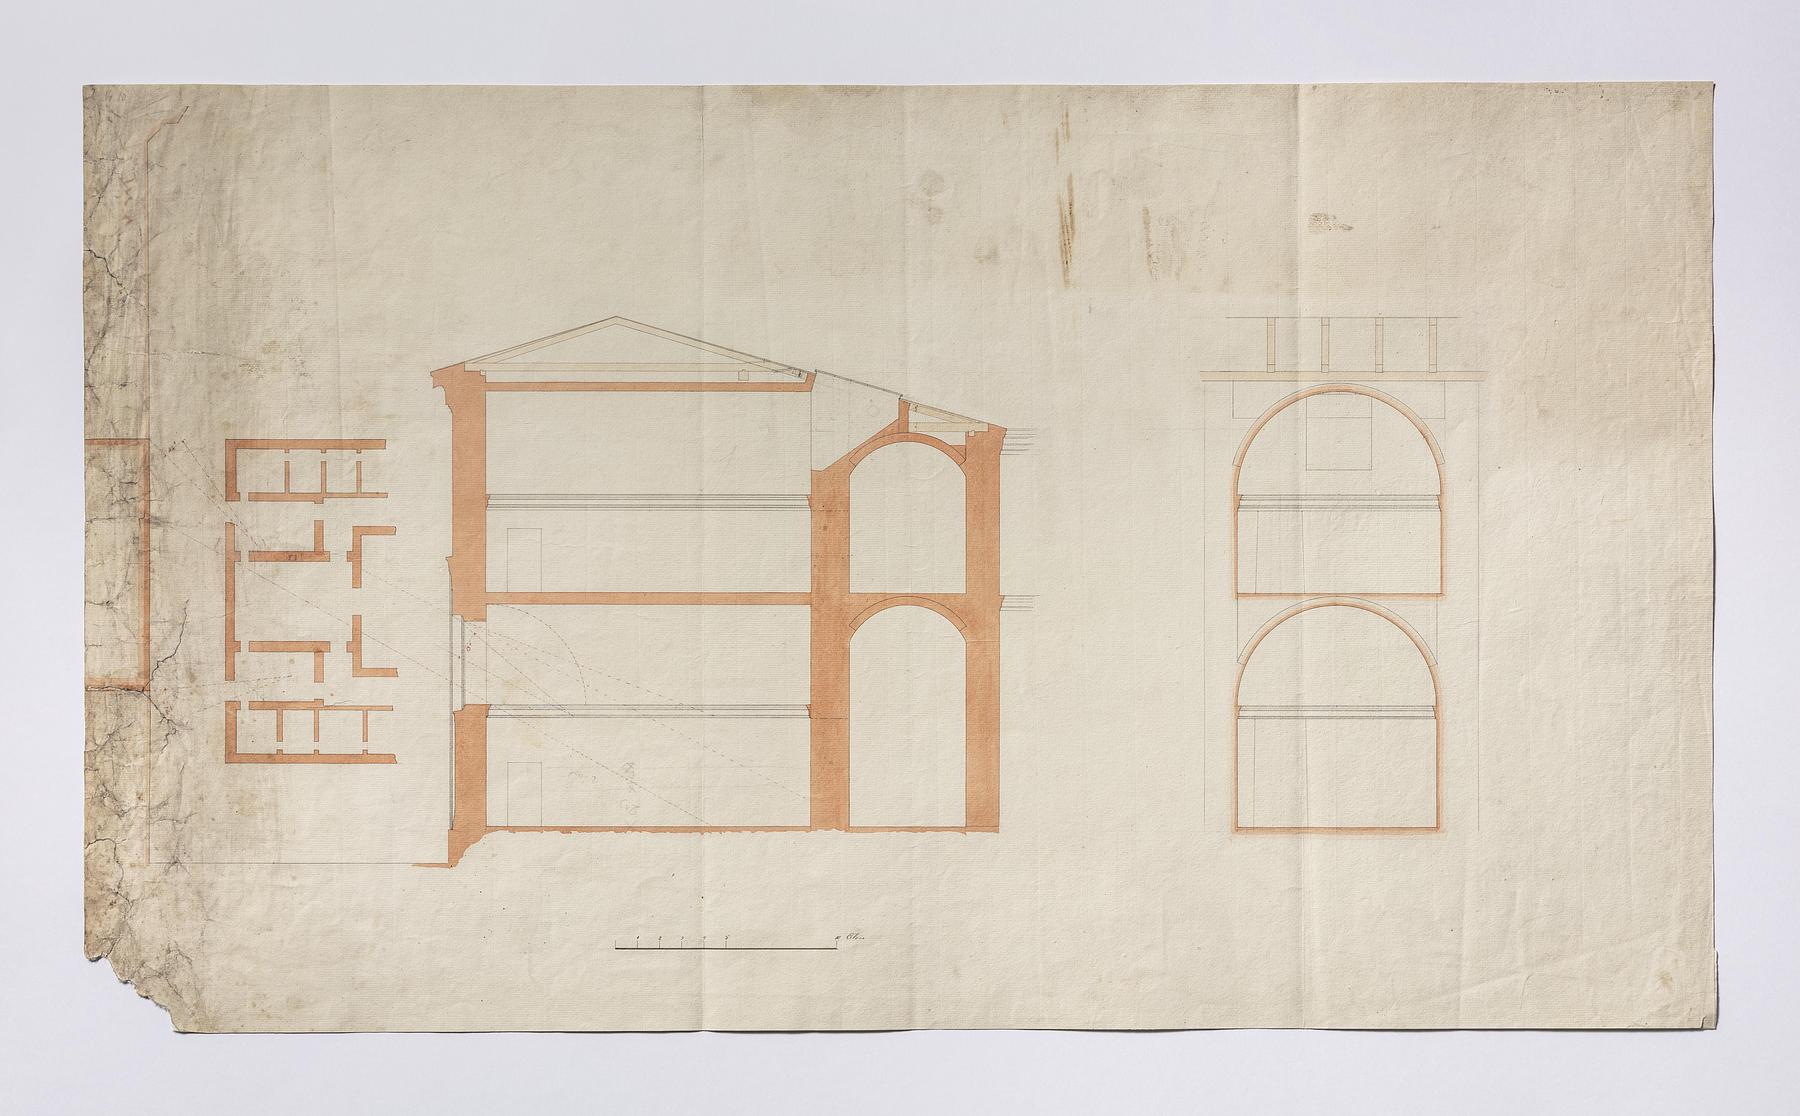 Thorvaldsens Museum, Plan, Longitudional Section and Cross Section through the Rooms no. 21 and 34, D1766r